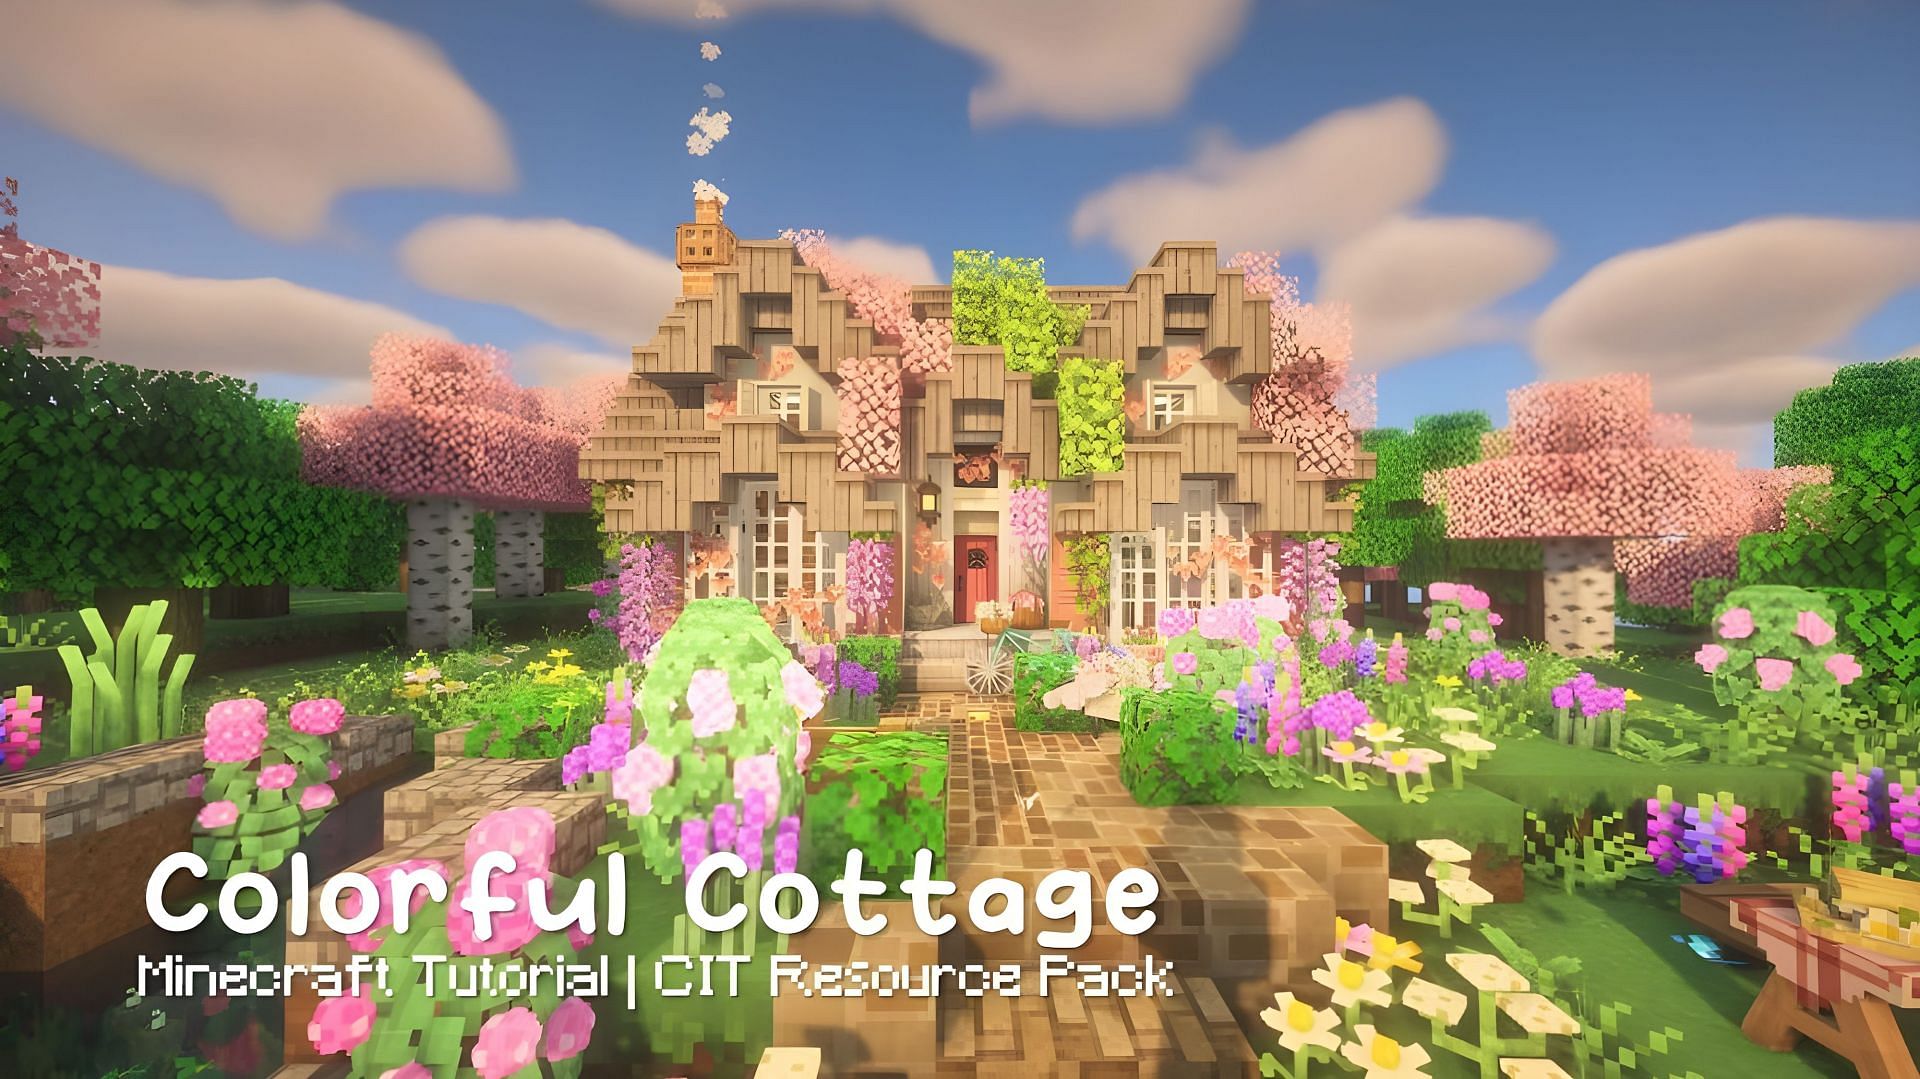 The Overgrown Colorful Cottage (Image via Youtube/cupxcakezys)